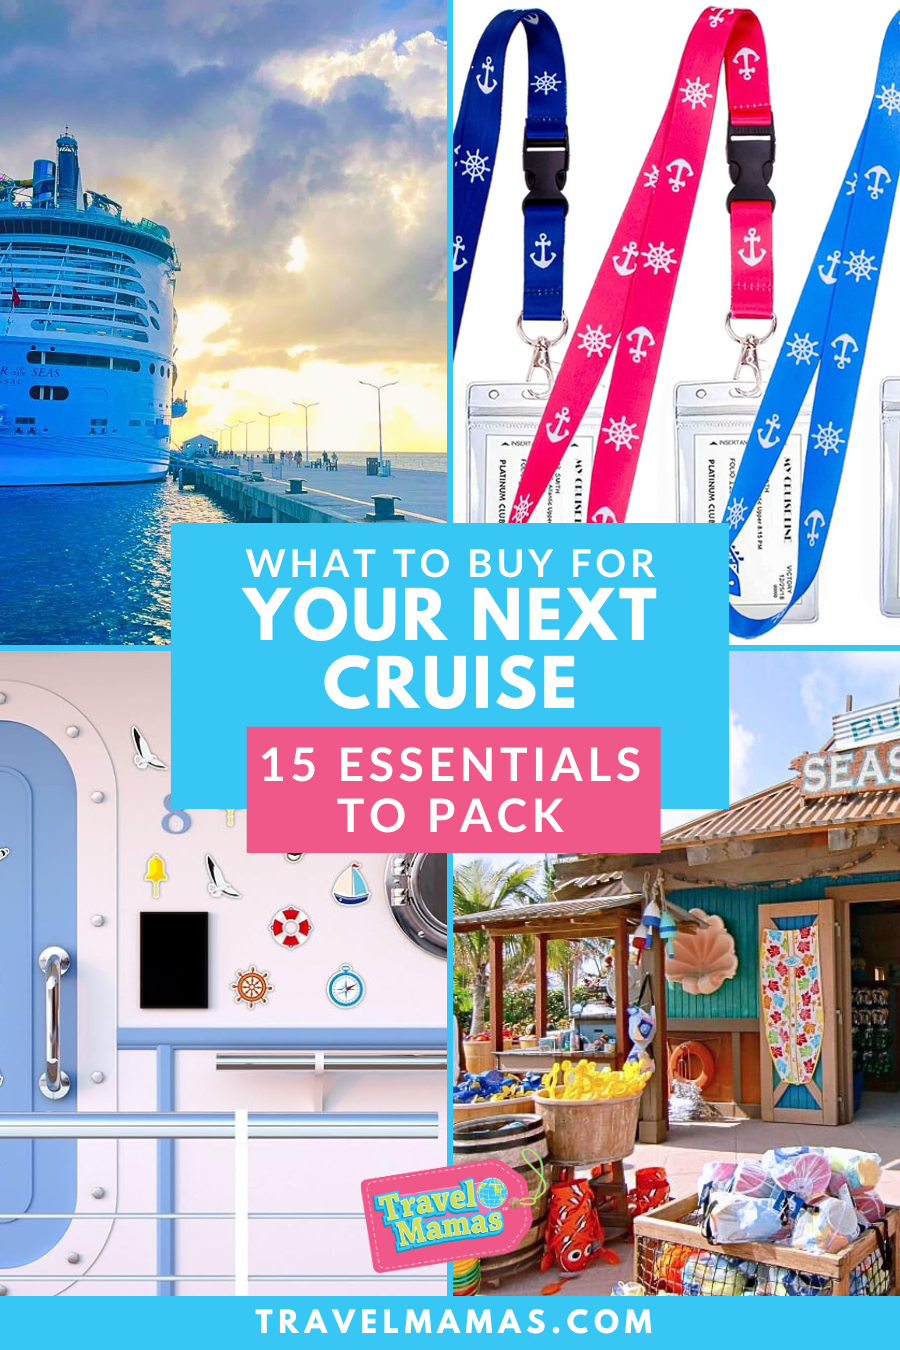 What to Buy for a Cruise (Essentials to Pack)